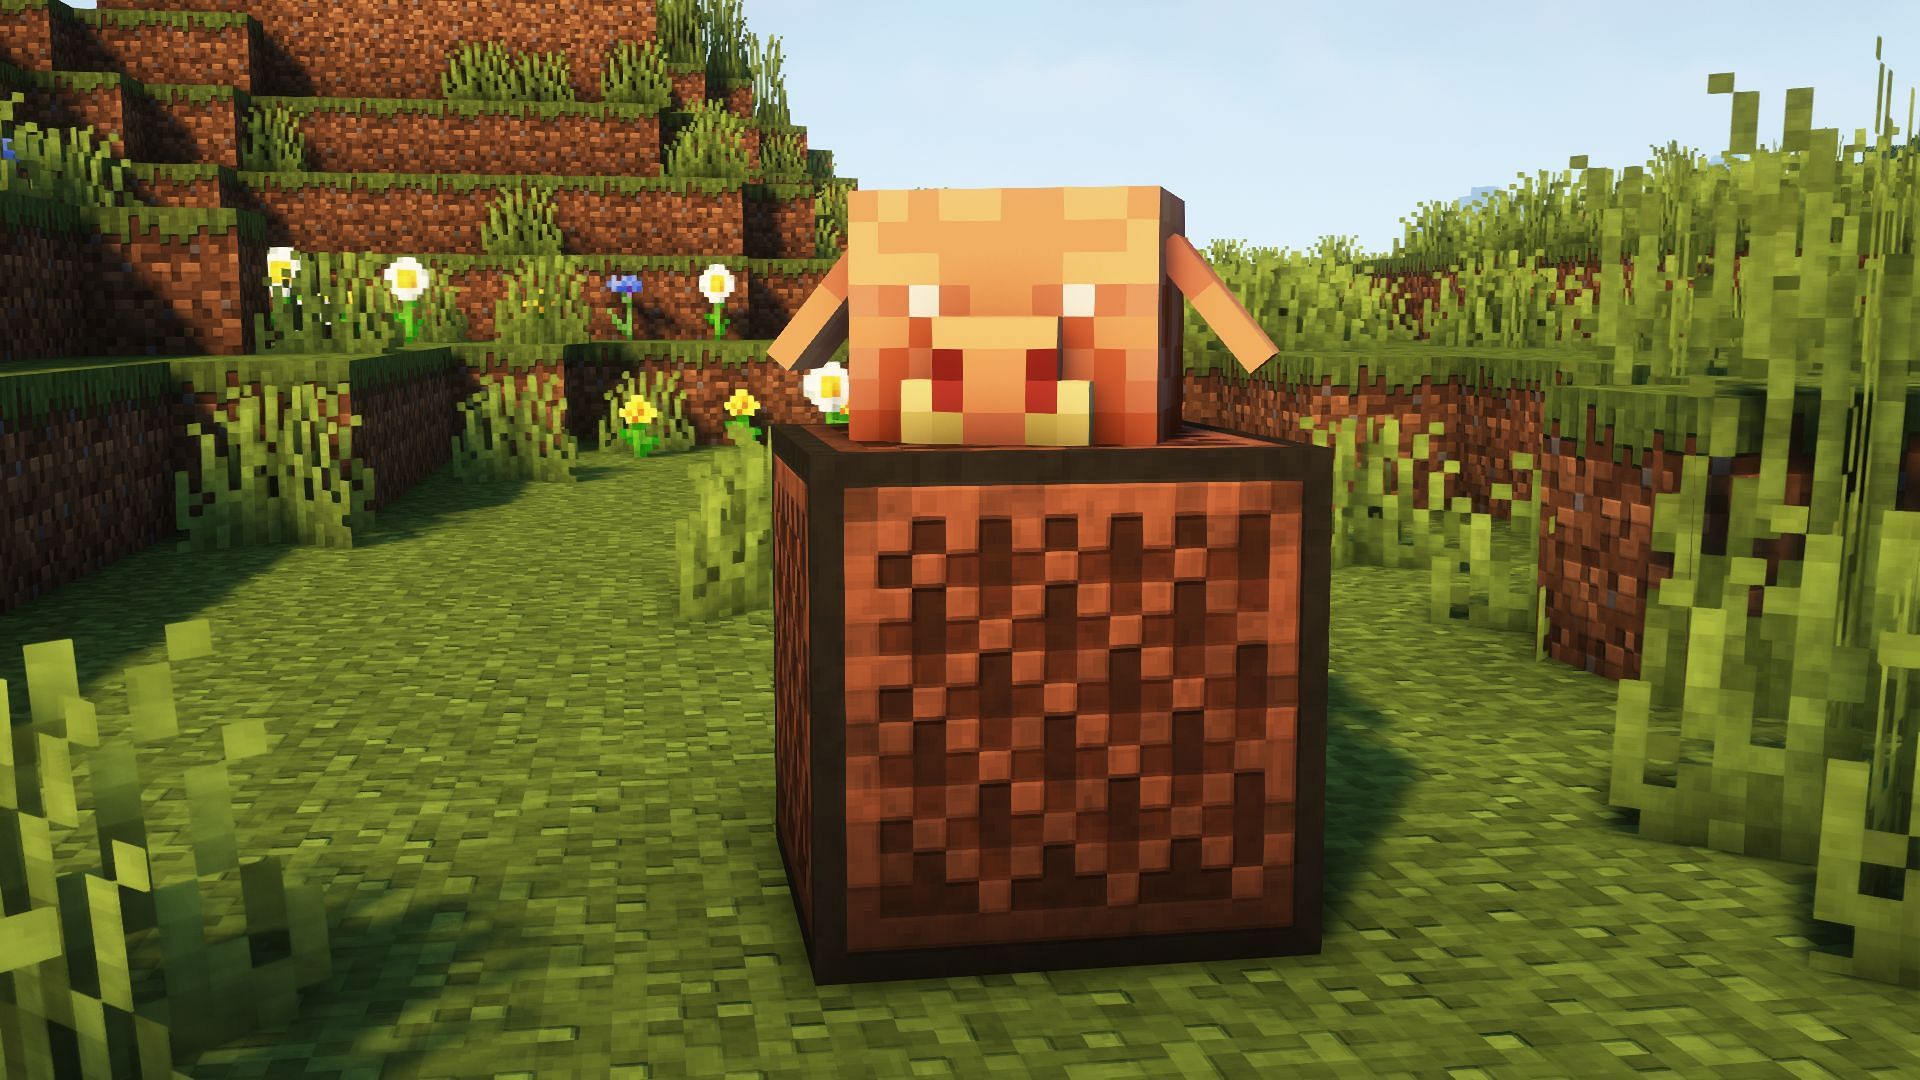 Minecraft 1.20 update changes note blocks, allowing it to play mob ambient sounds according to the mob head placed on it (Image via Mojang)